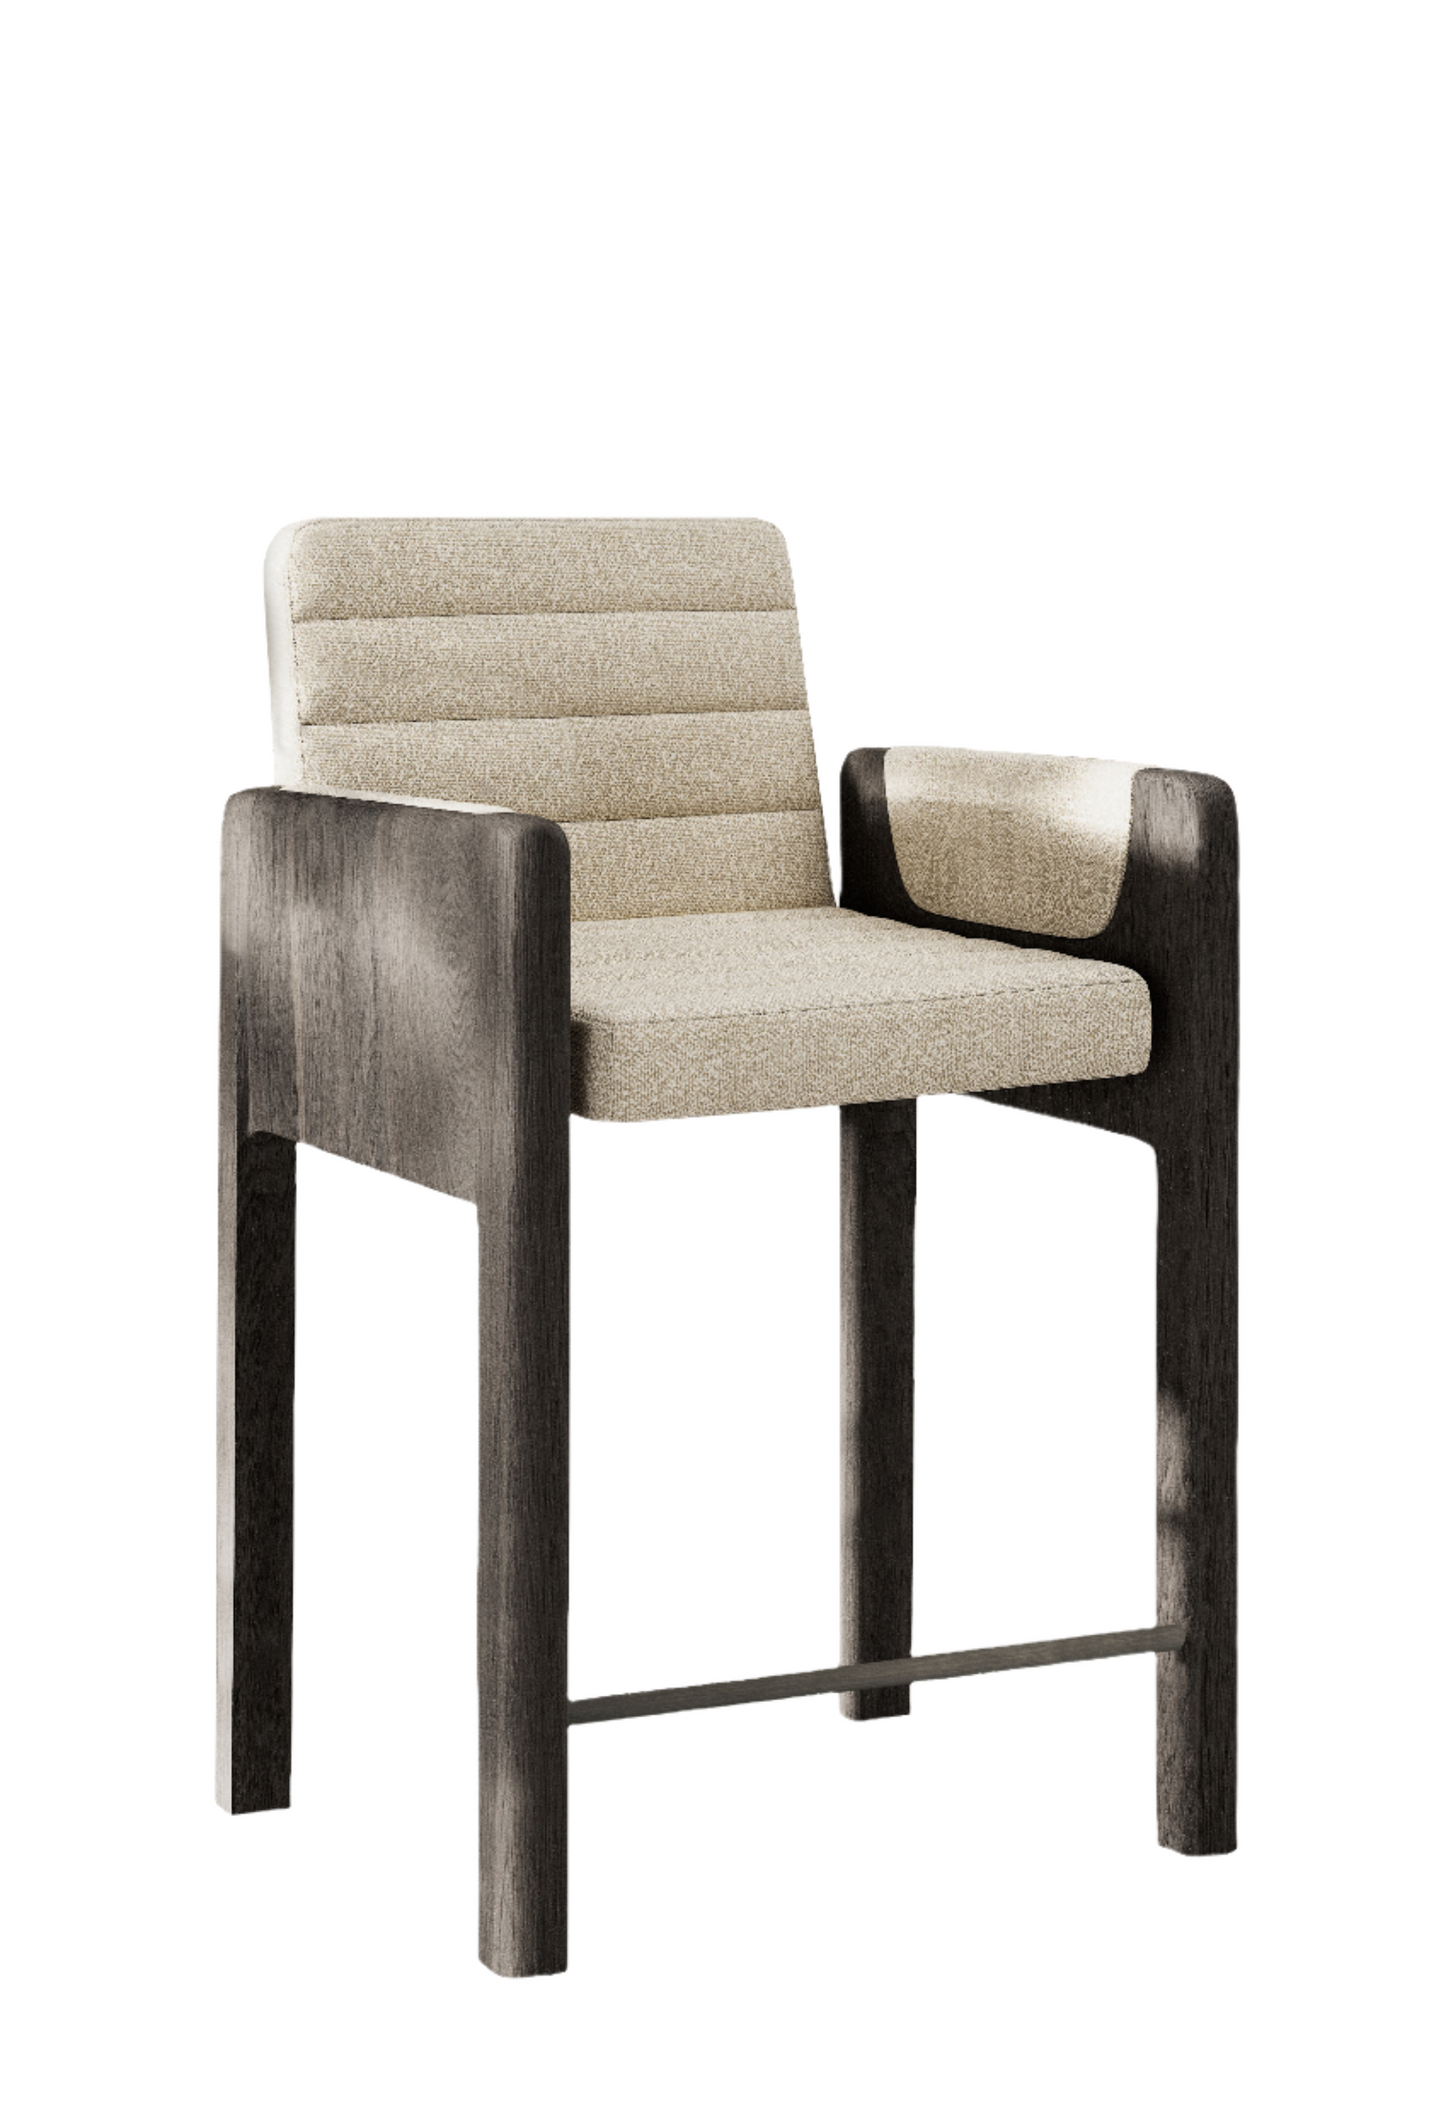 BARATTI BARSTOOL | COLLECTION PIETRA CASA | QUOTE BY REQUEST